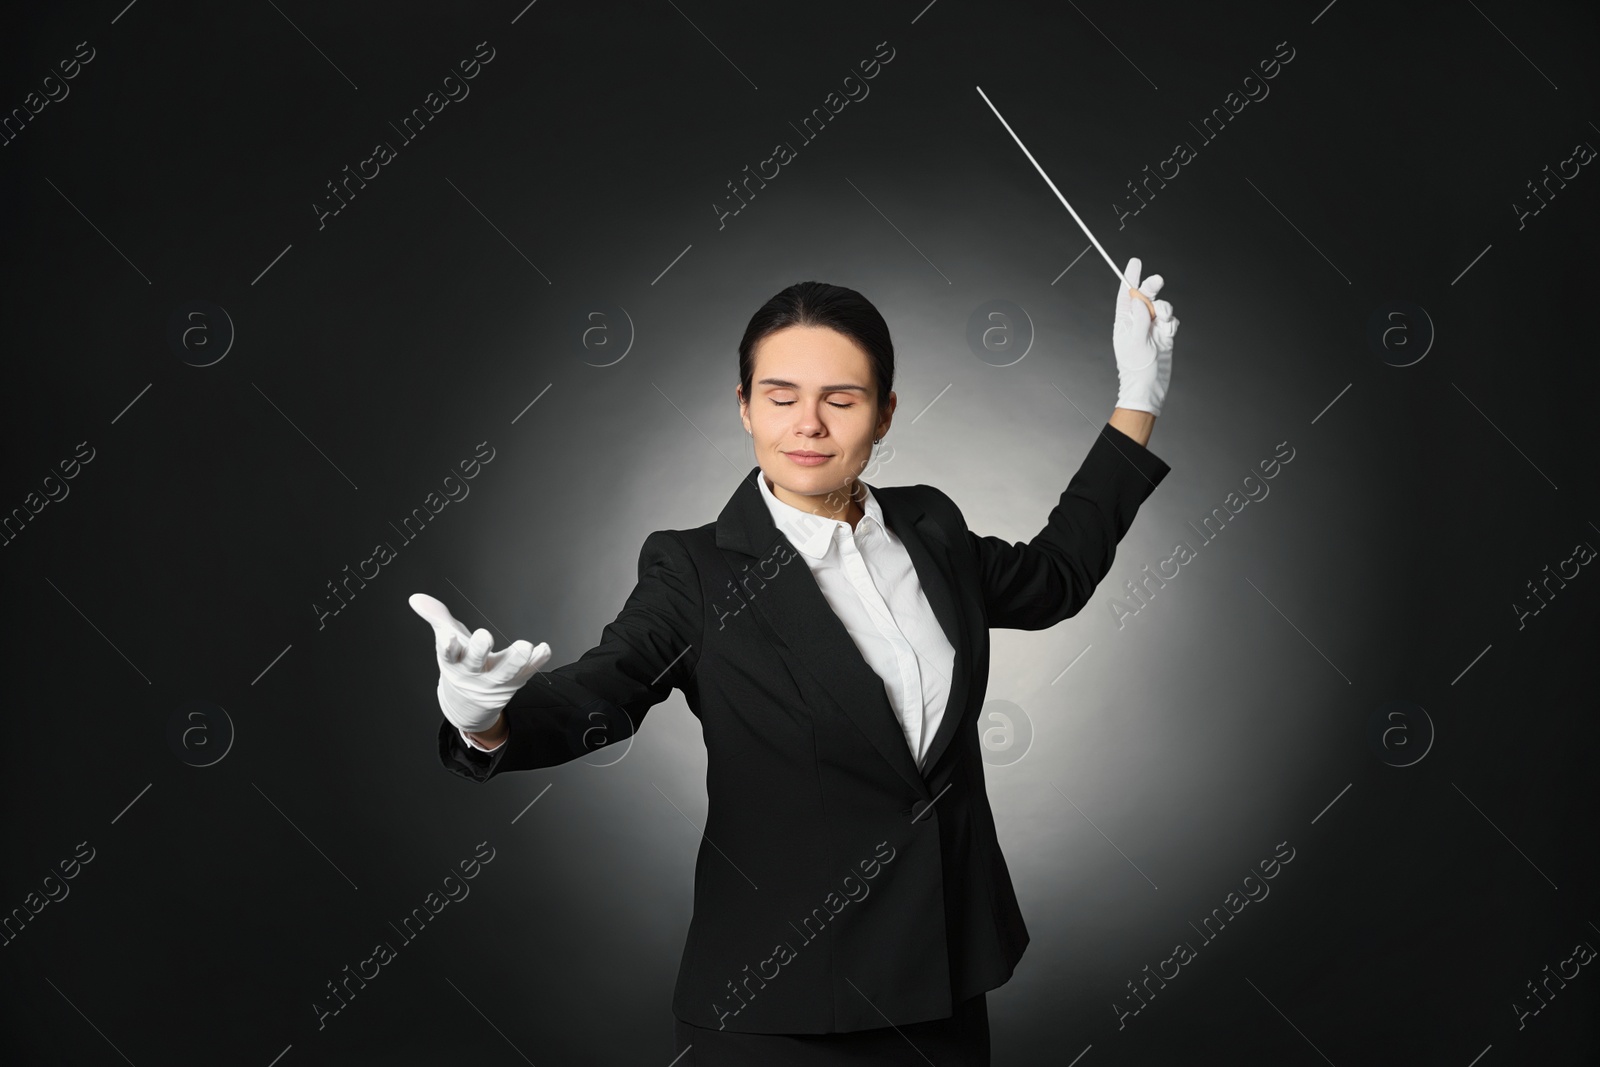 Photo of Professional conductor with baton on black background